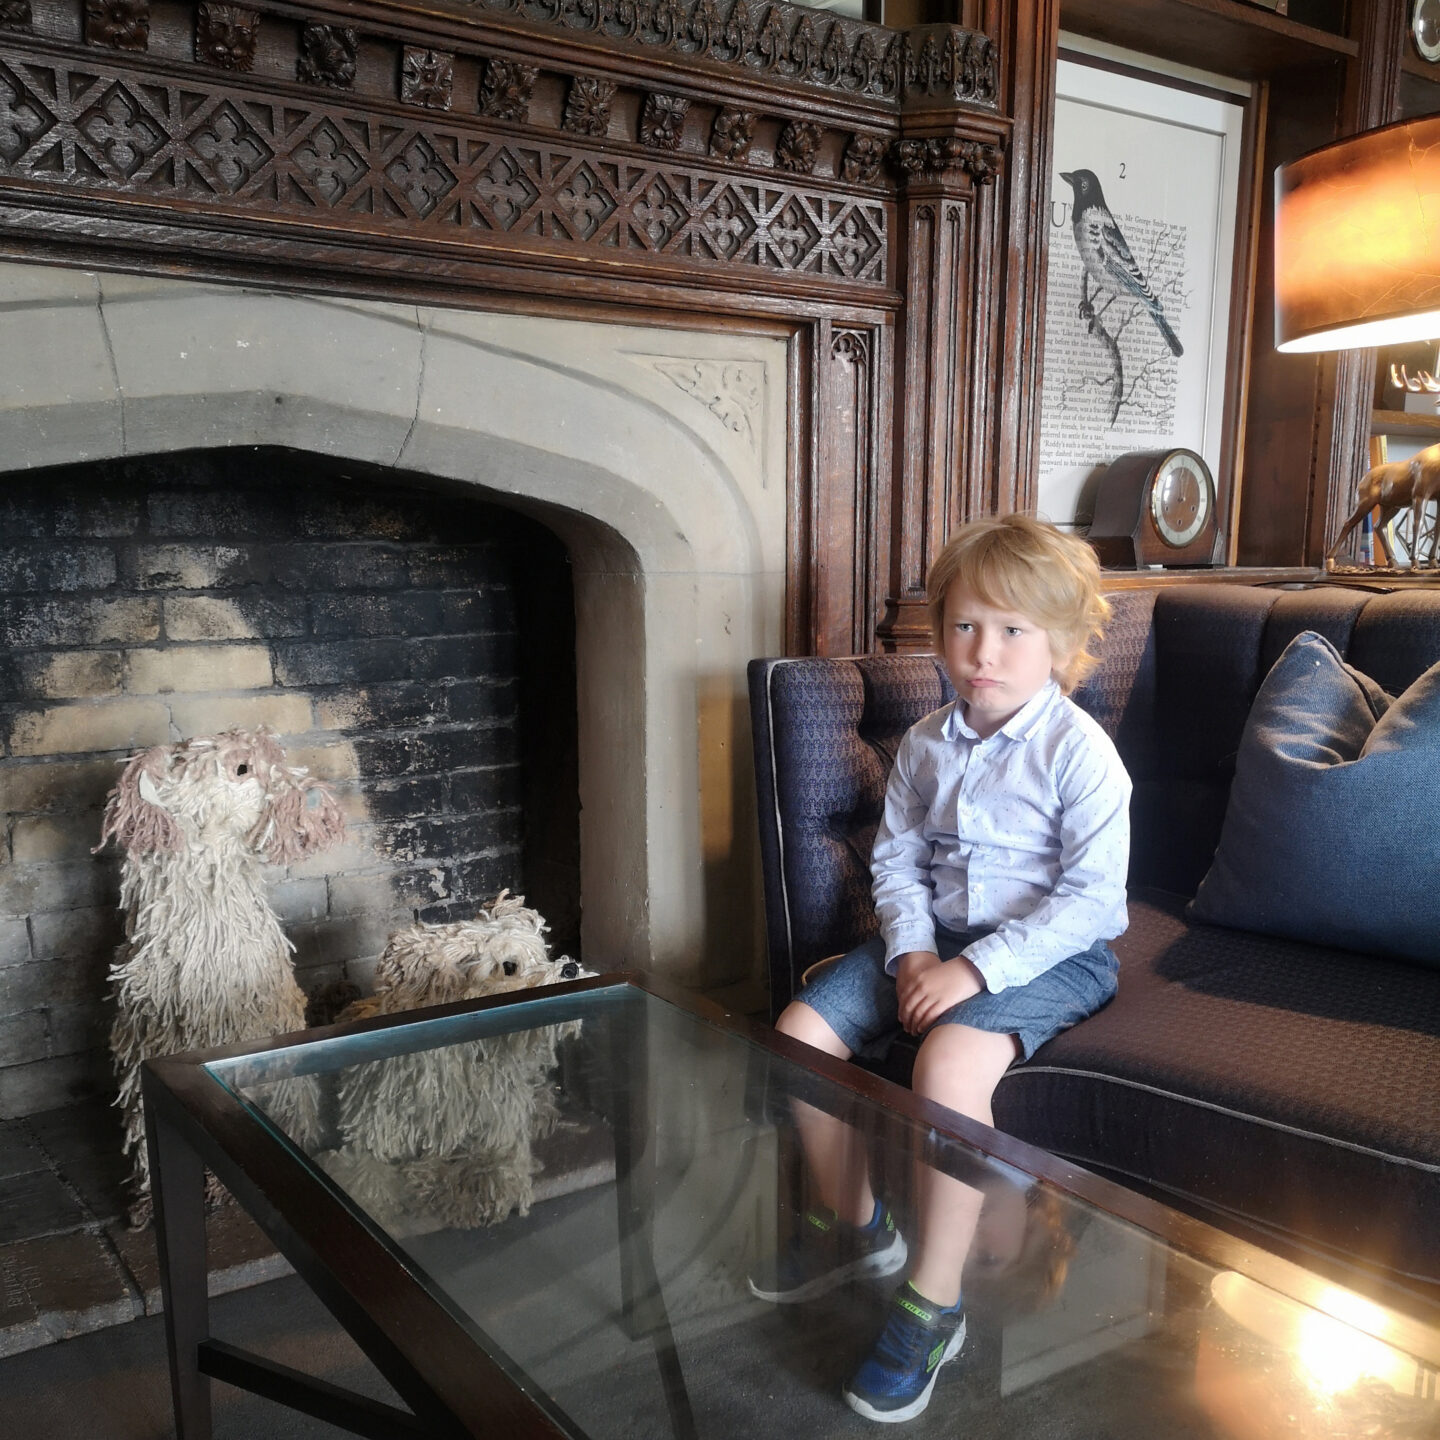 De Vere Latimer Estate, Buckinghamshire, Country Estate Hotel, Grade I listed house, Chess Valley Hills, Hotel Review, Family Stay, UK Staycation, the Frenchie Mummy, De Vere Hotels , Press Trip, Family Friendly, UK Hotels